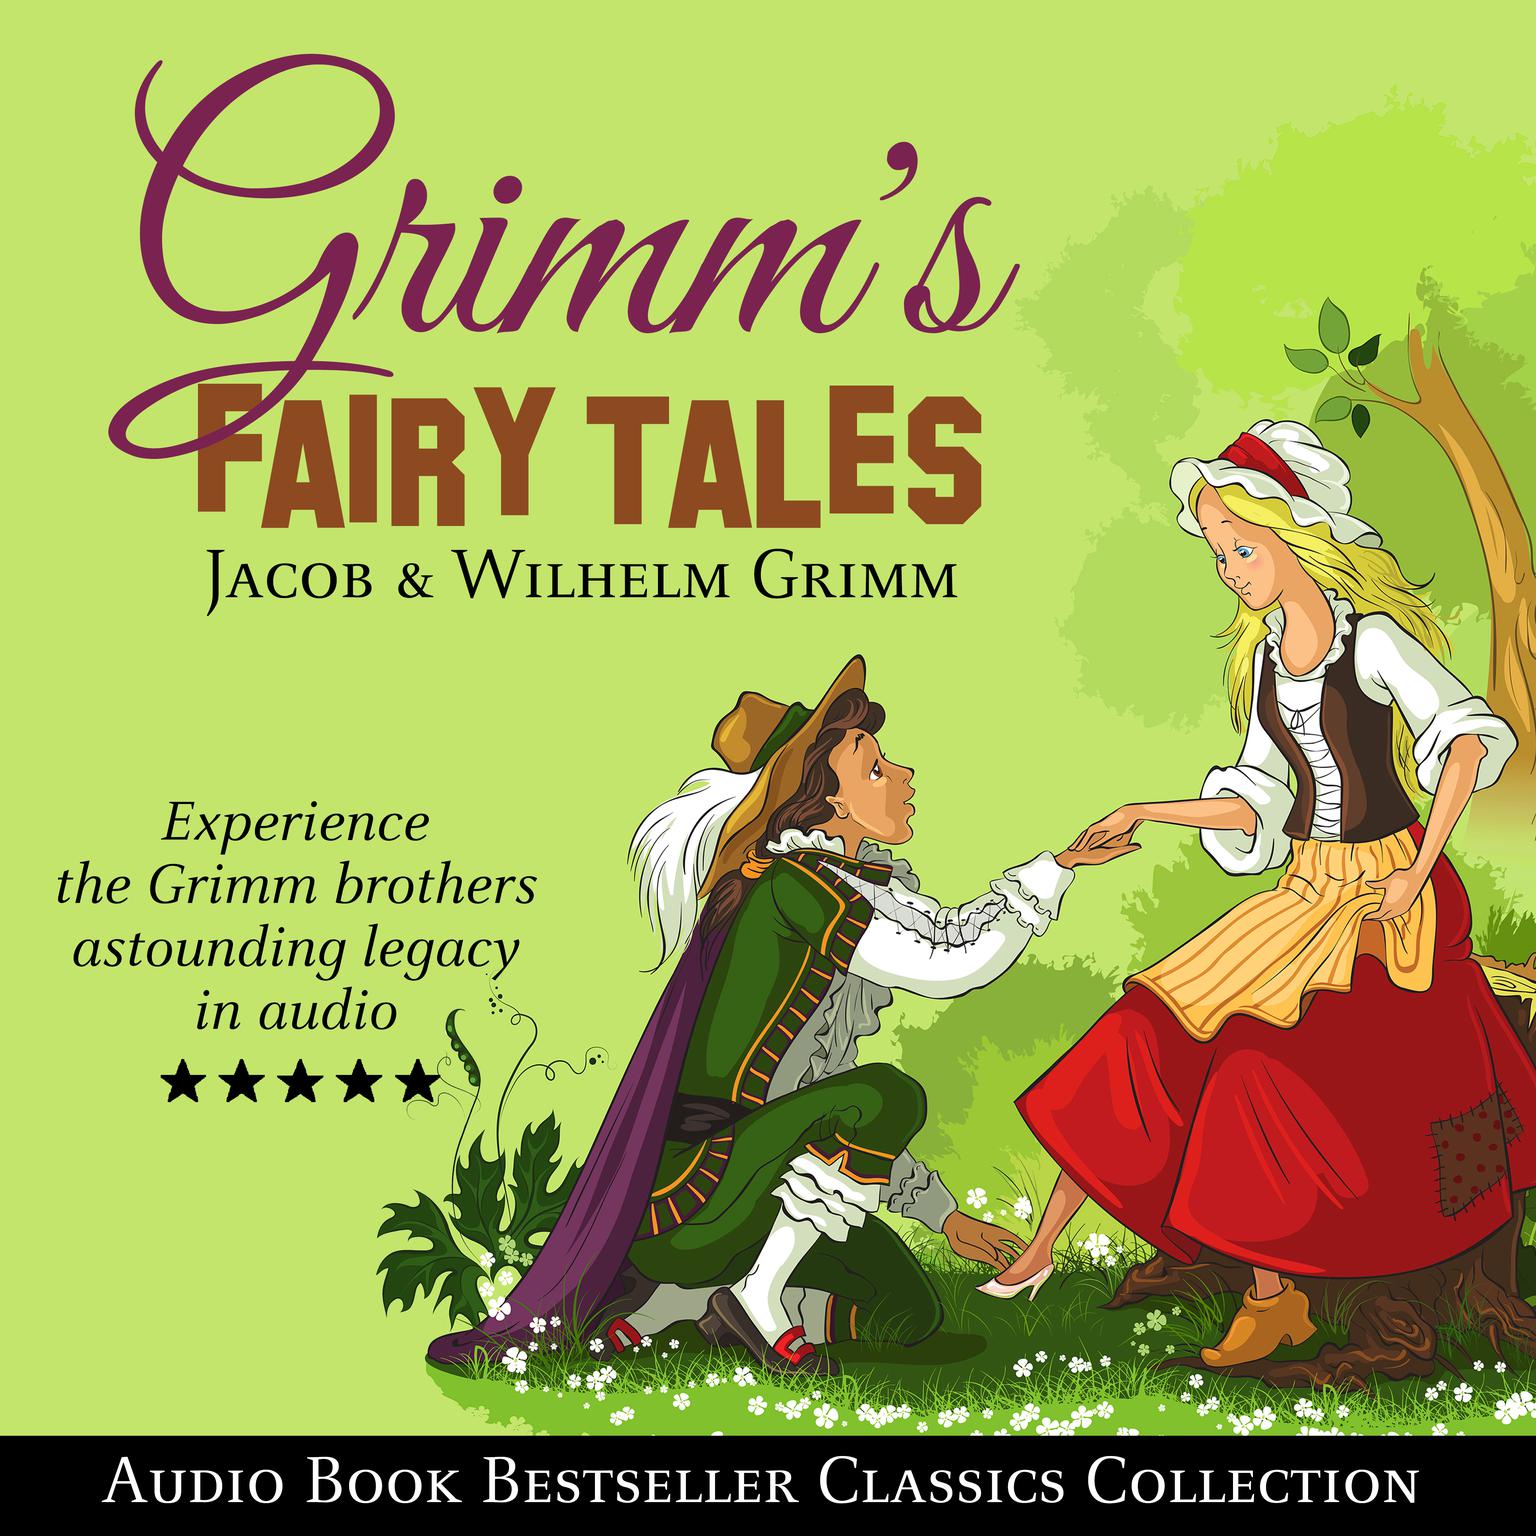 Grimms Fairy Tales: Audio Book Bestseller Classics Collection Audiobook, by The Brothers Grimm